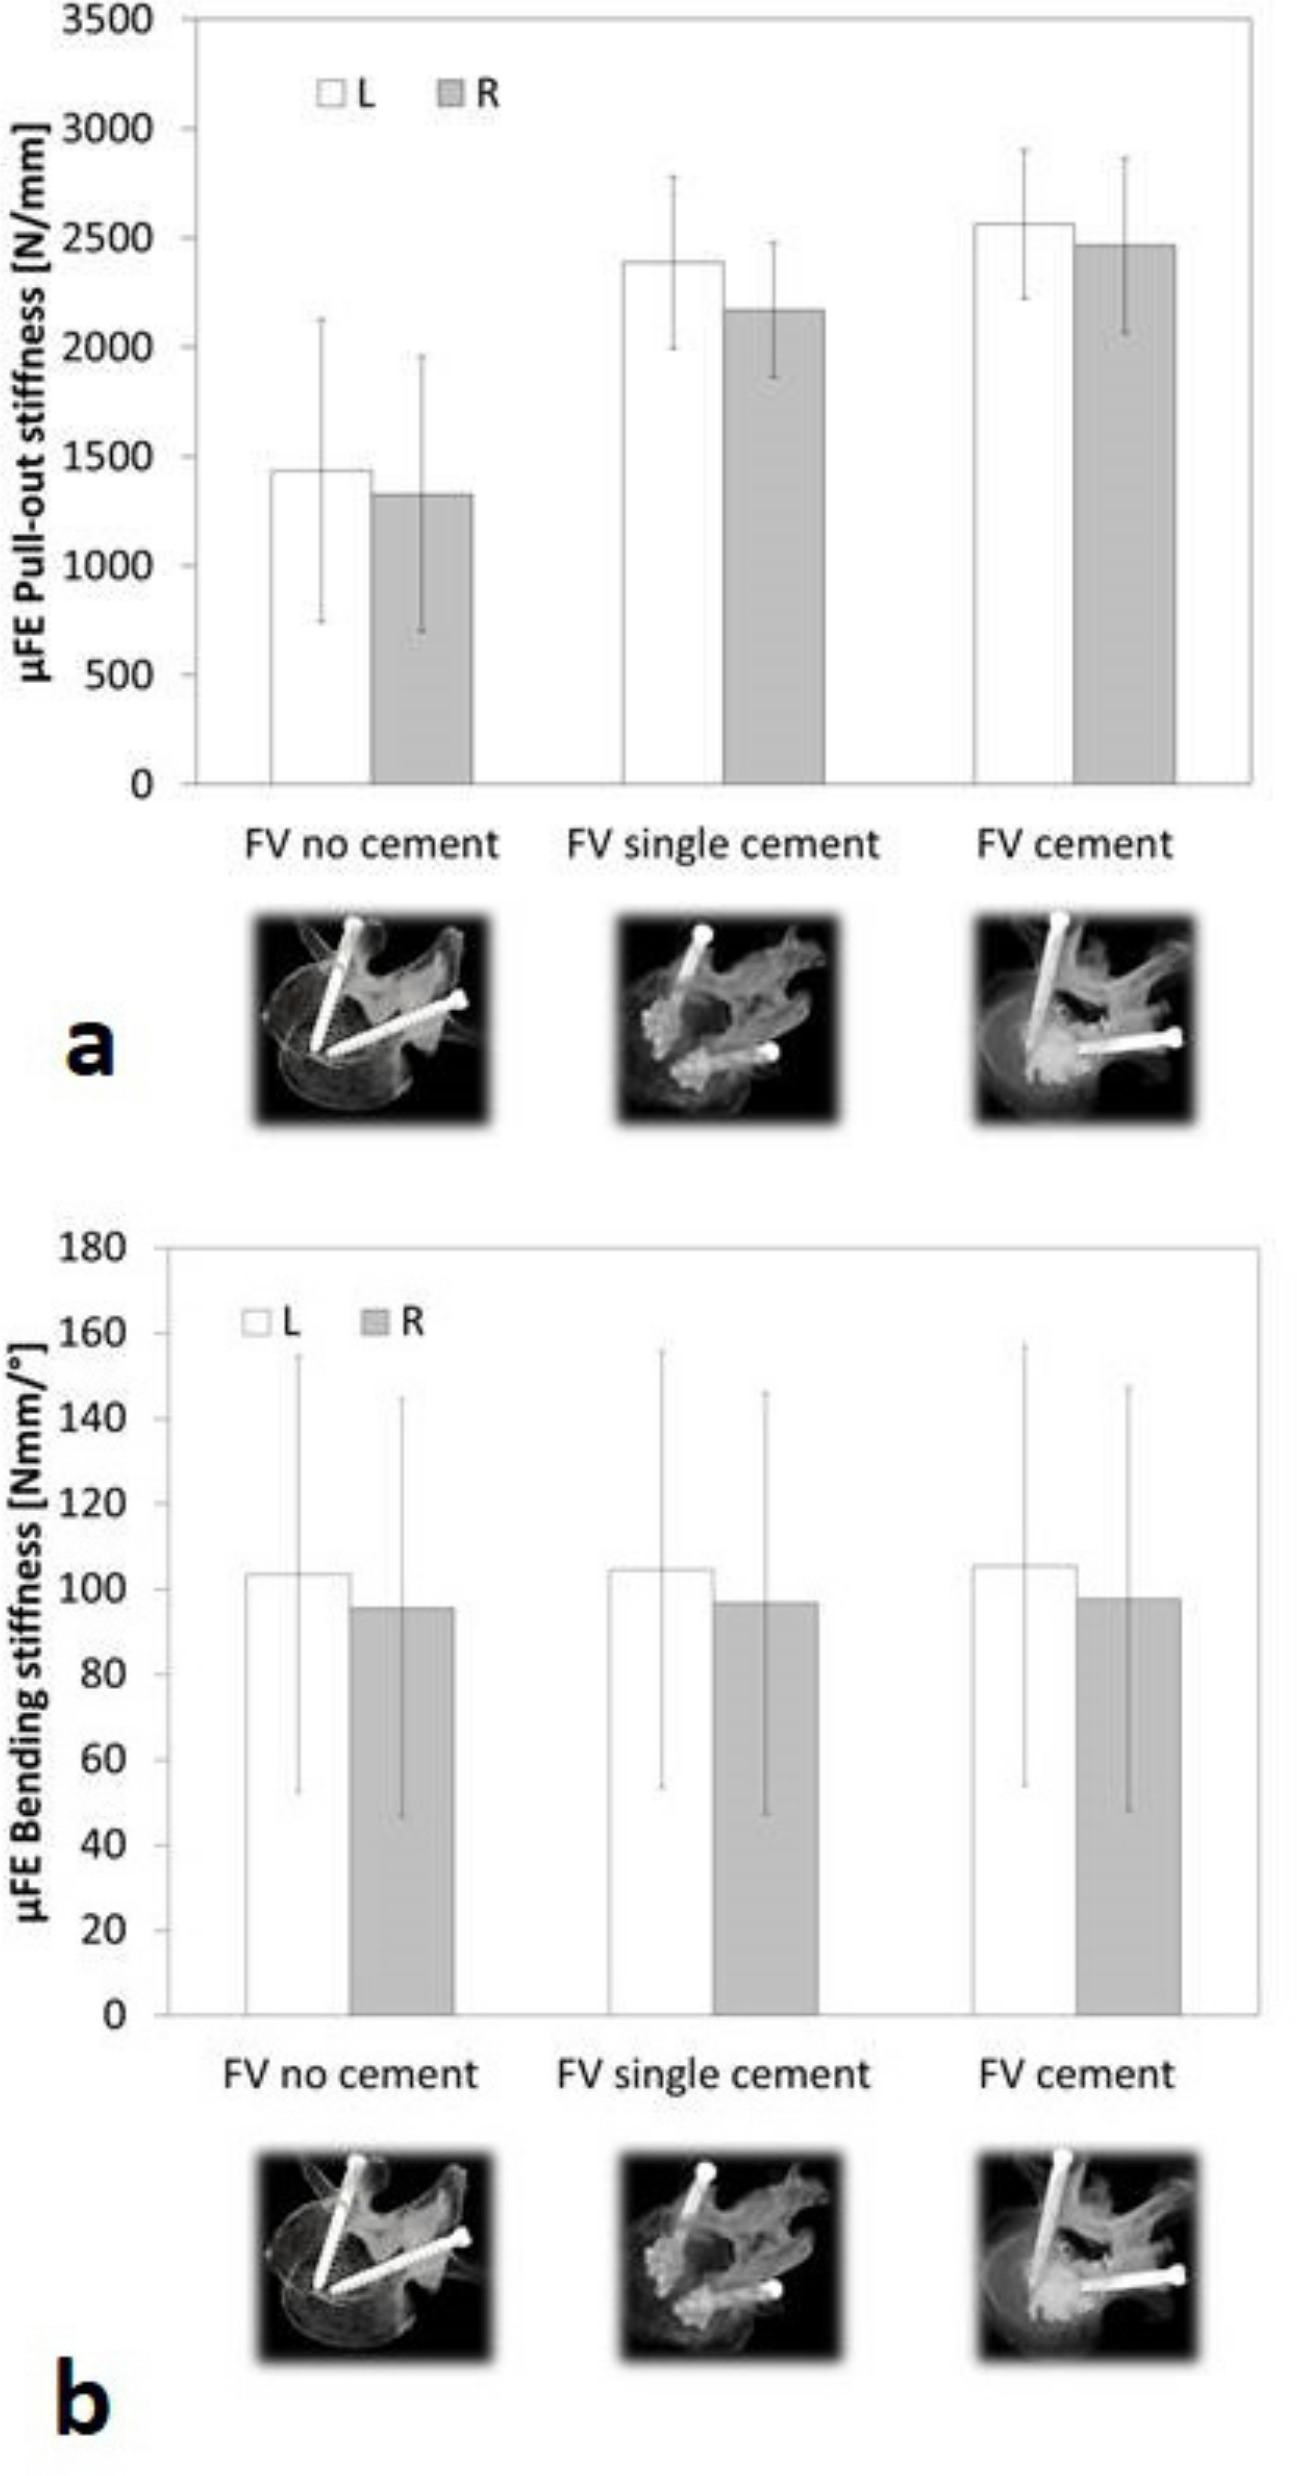 Fig. 6 
            The effect of different cement augmentation scenarios on the mean predicted stiffness in a) pull-out and b) bending from the full vertebral models. FV, full vertebra; L screw, Ennovate screw; R screw, S4 screw; µFE, microfinite element.
          